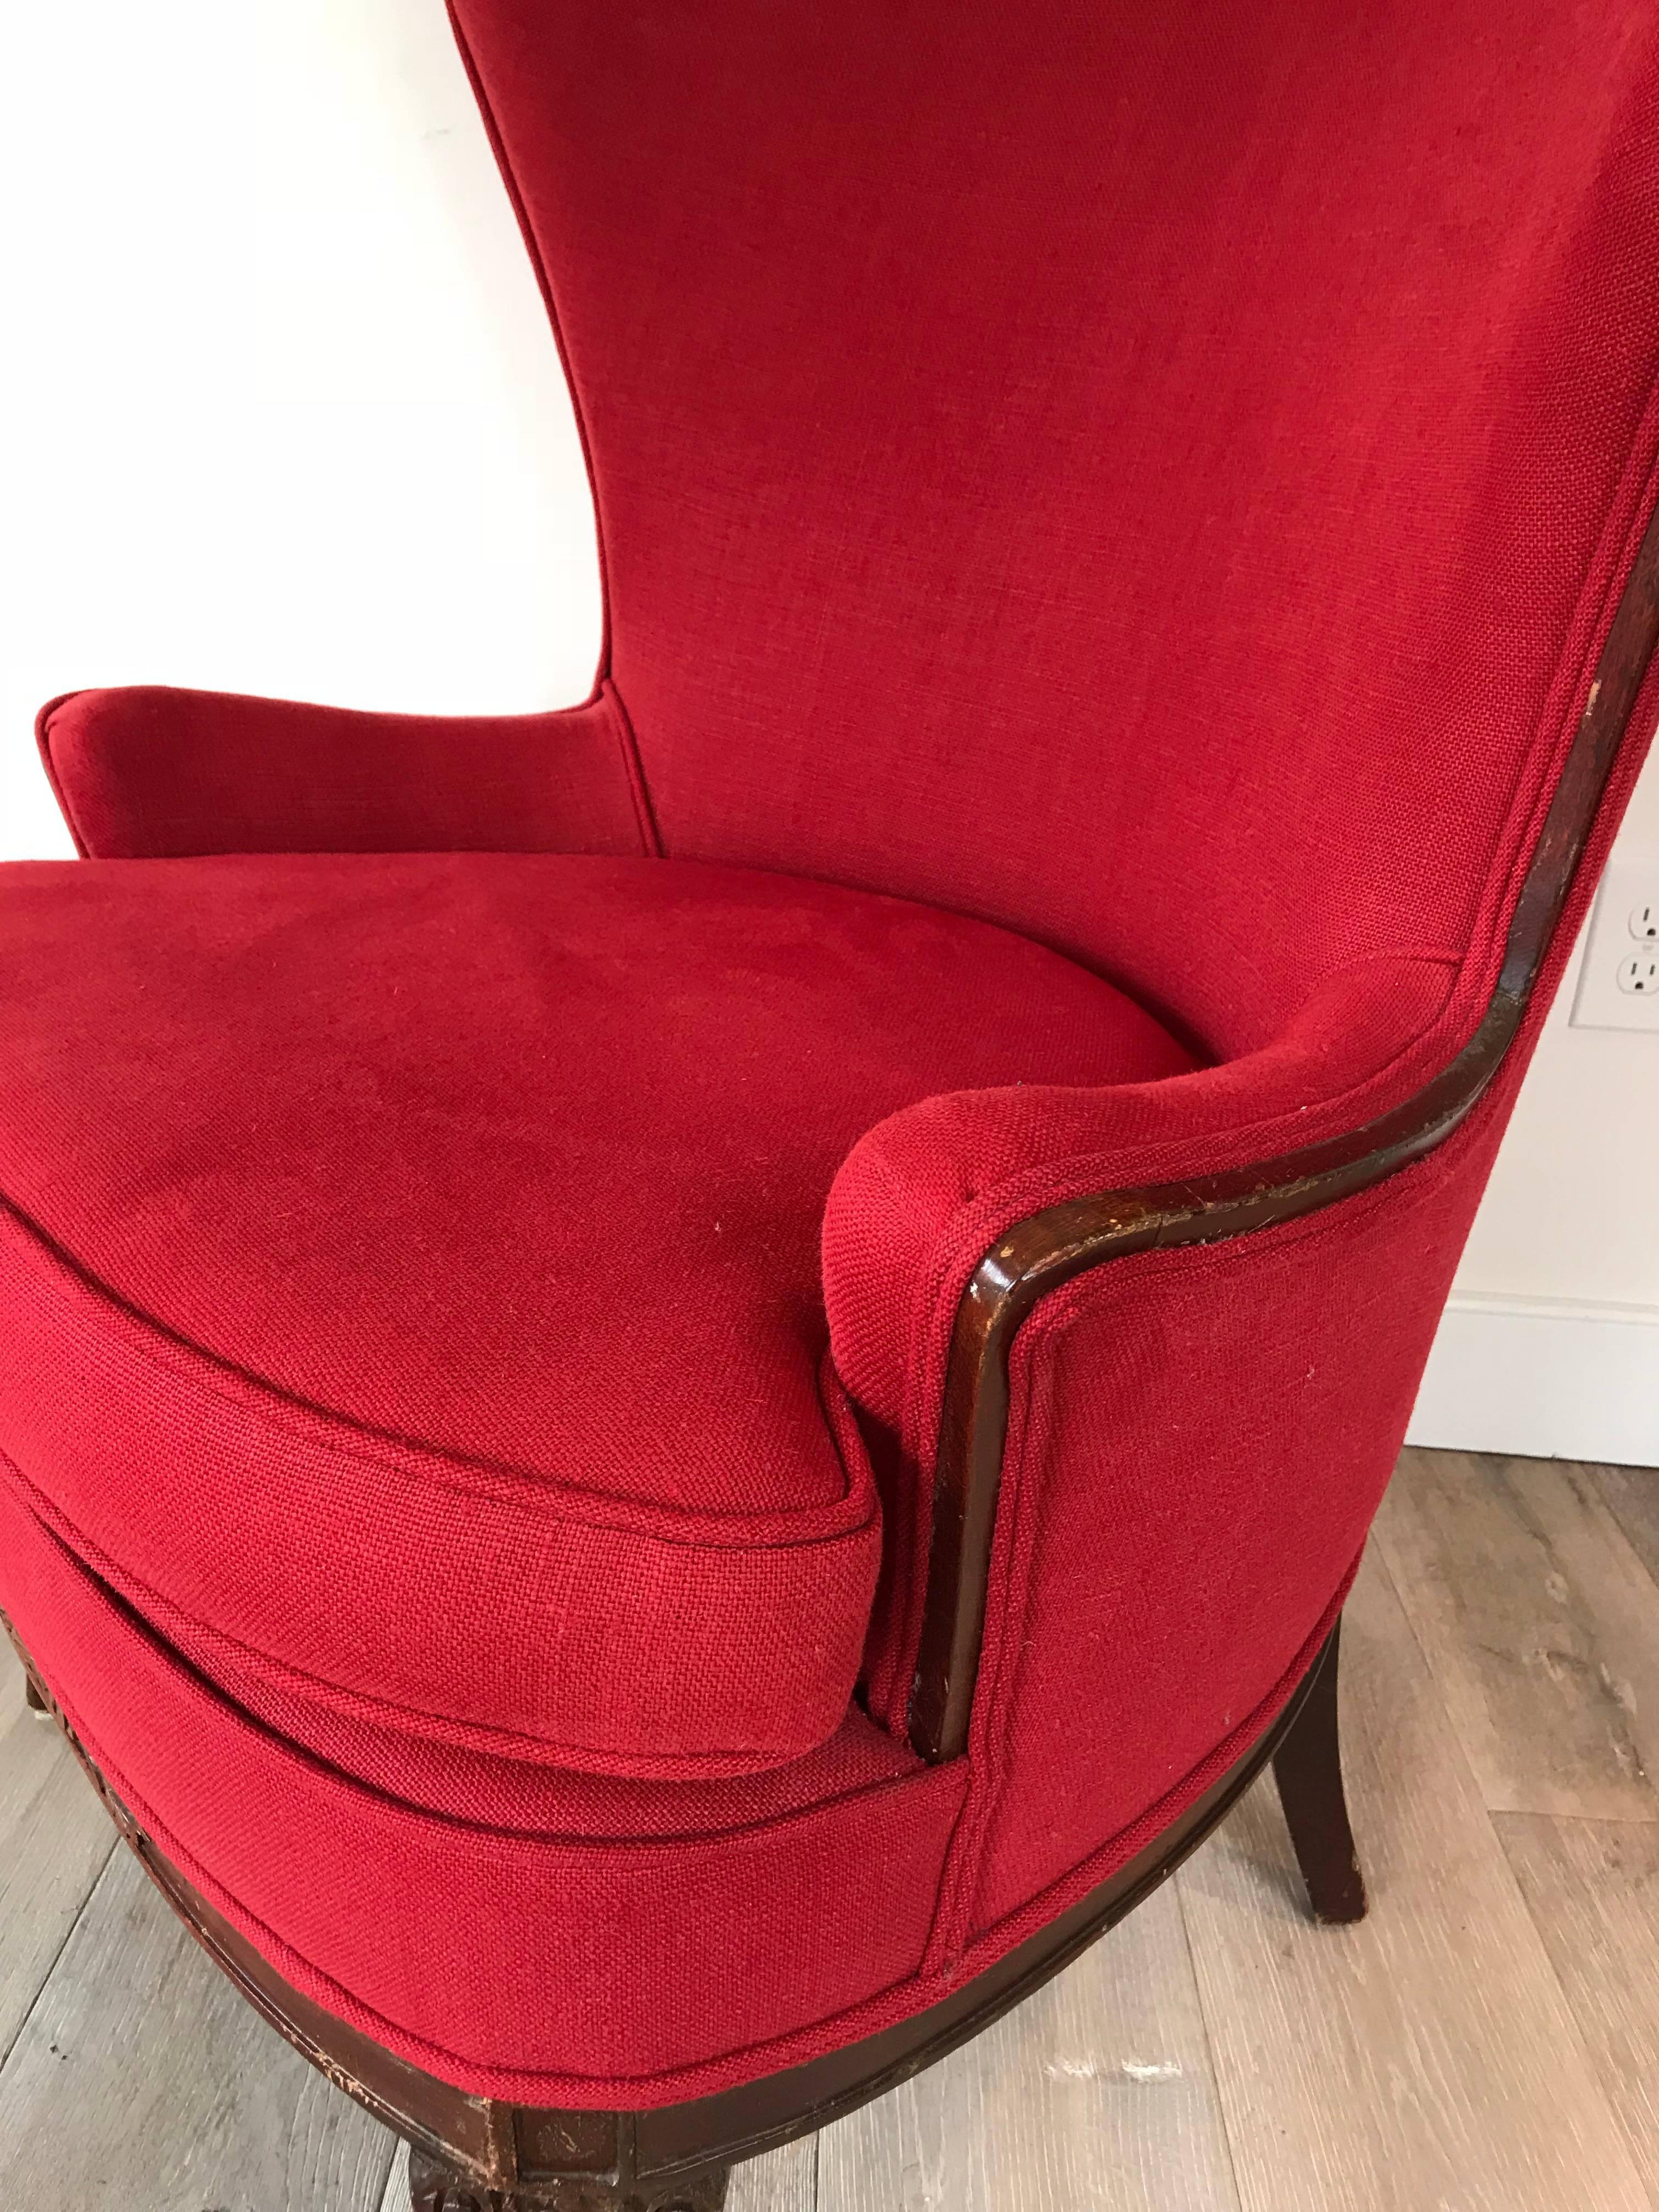 19th Century French Wing Chair 3